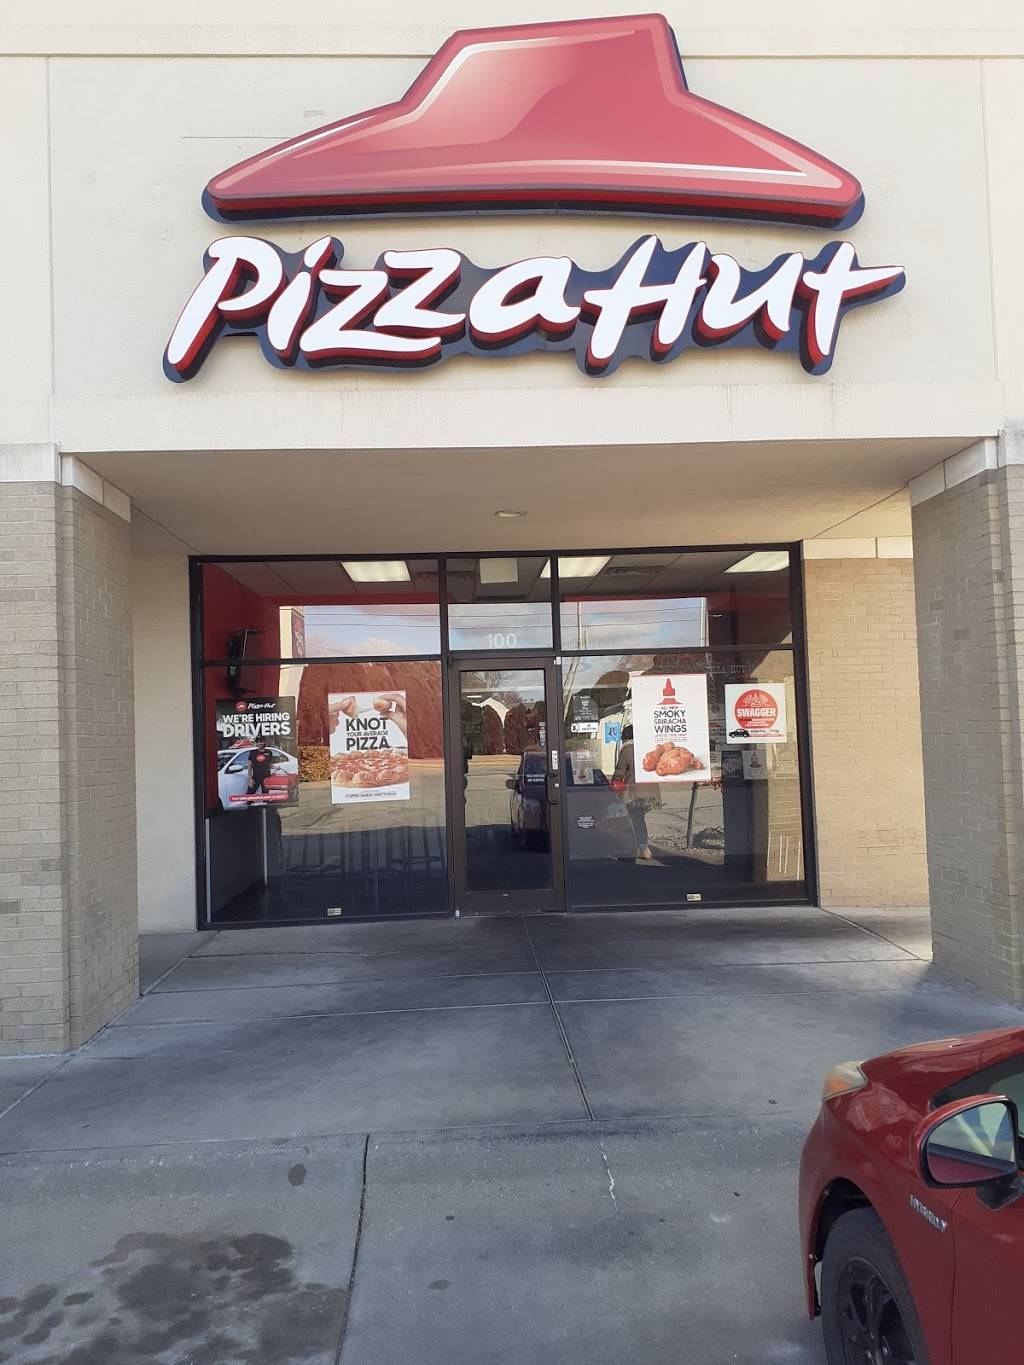 Pizza Hut | meal delivery | 6505 E 37th St N Suite 100, Wichita, KS 67226, USA | 3166180403 OR +1 316-618-0403